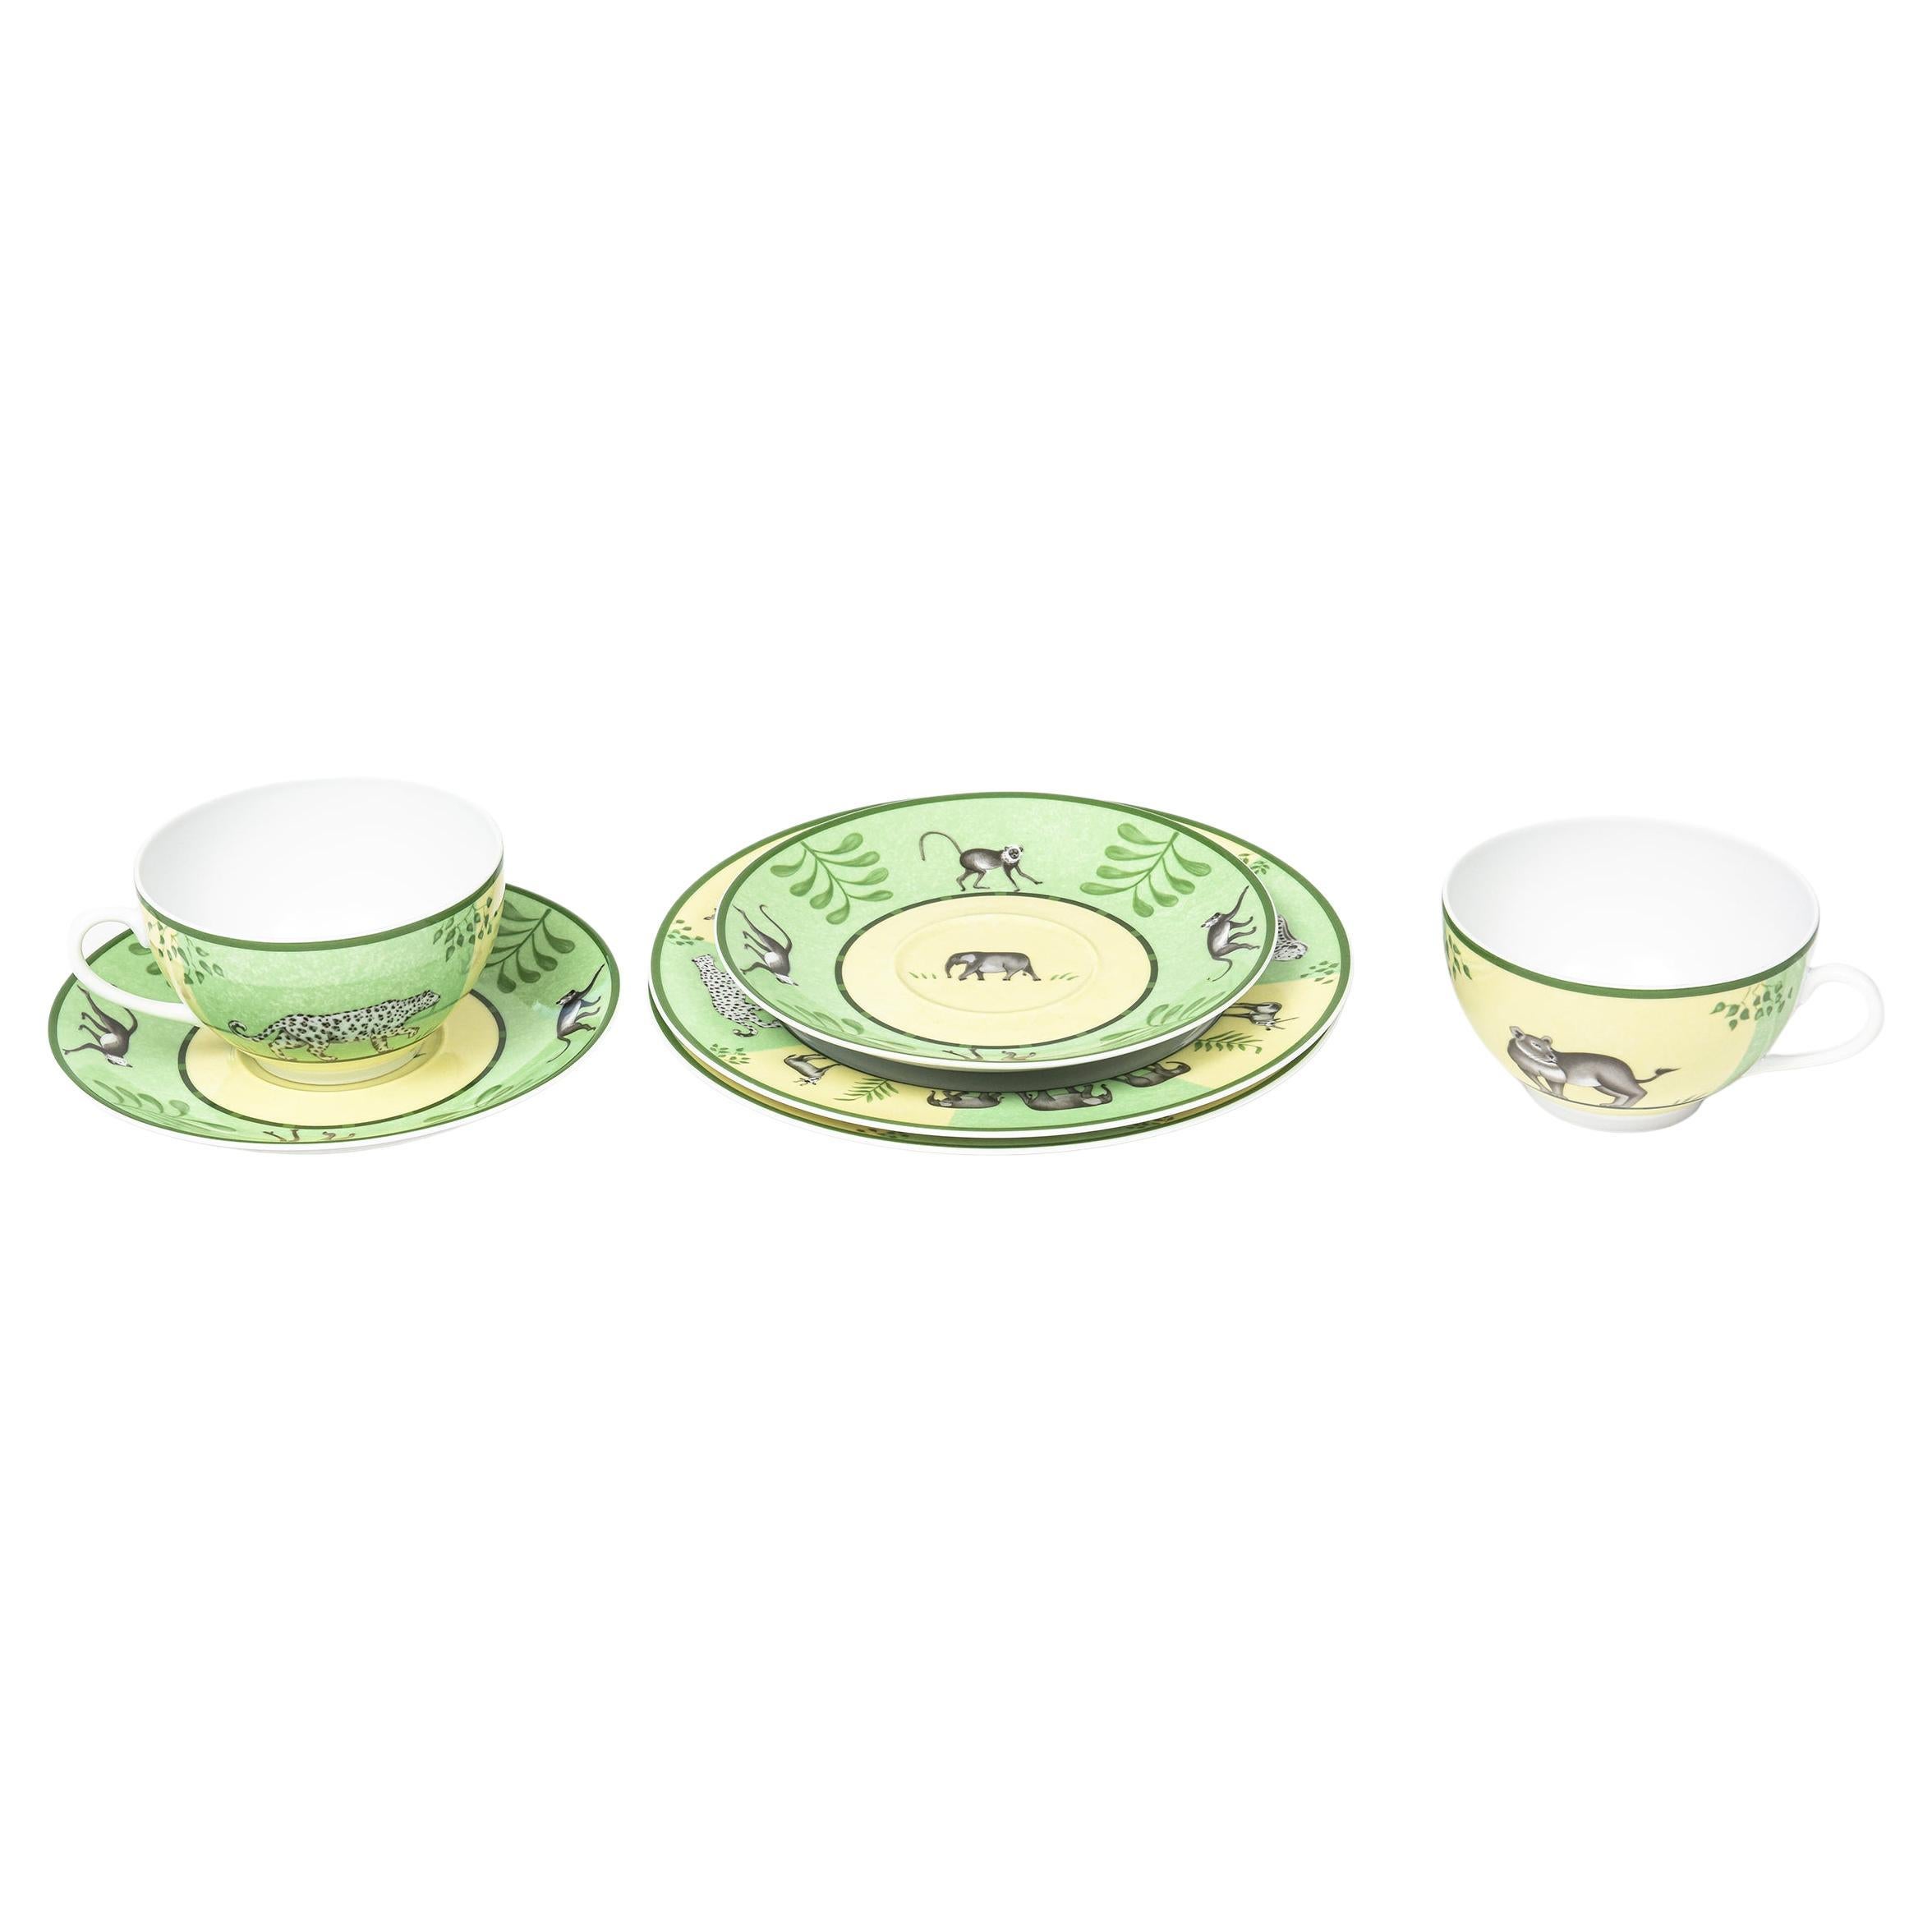 Hermes Africa Green Morning Breakfast Set, Pair of Cup with Saucer and Plate